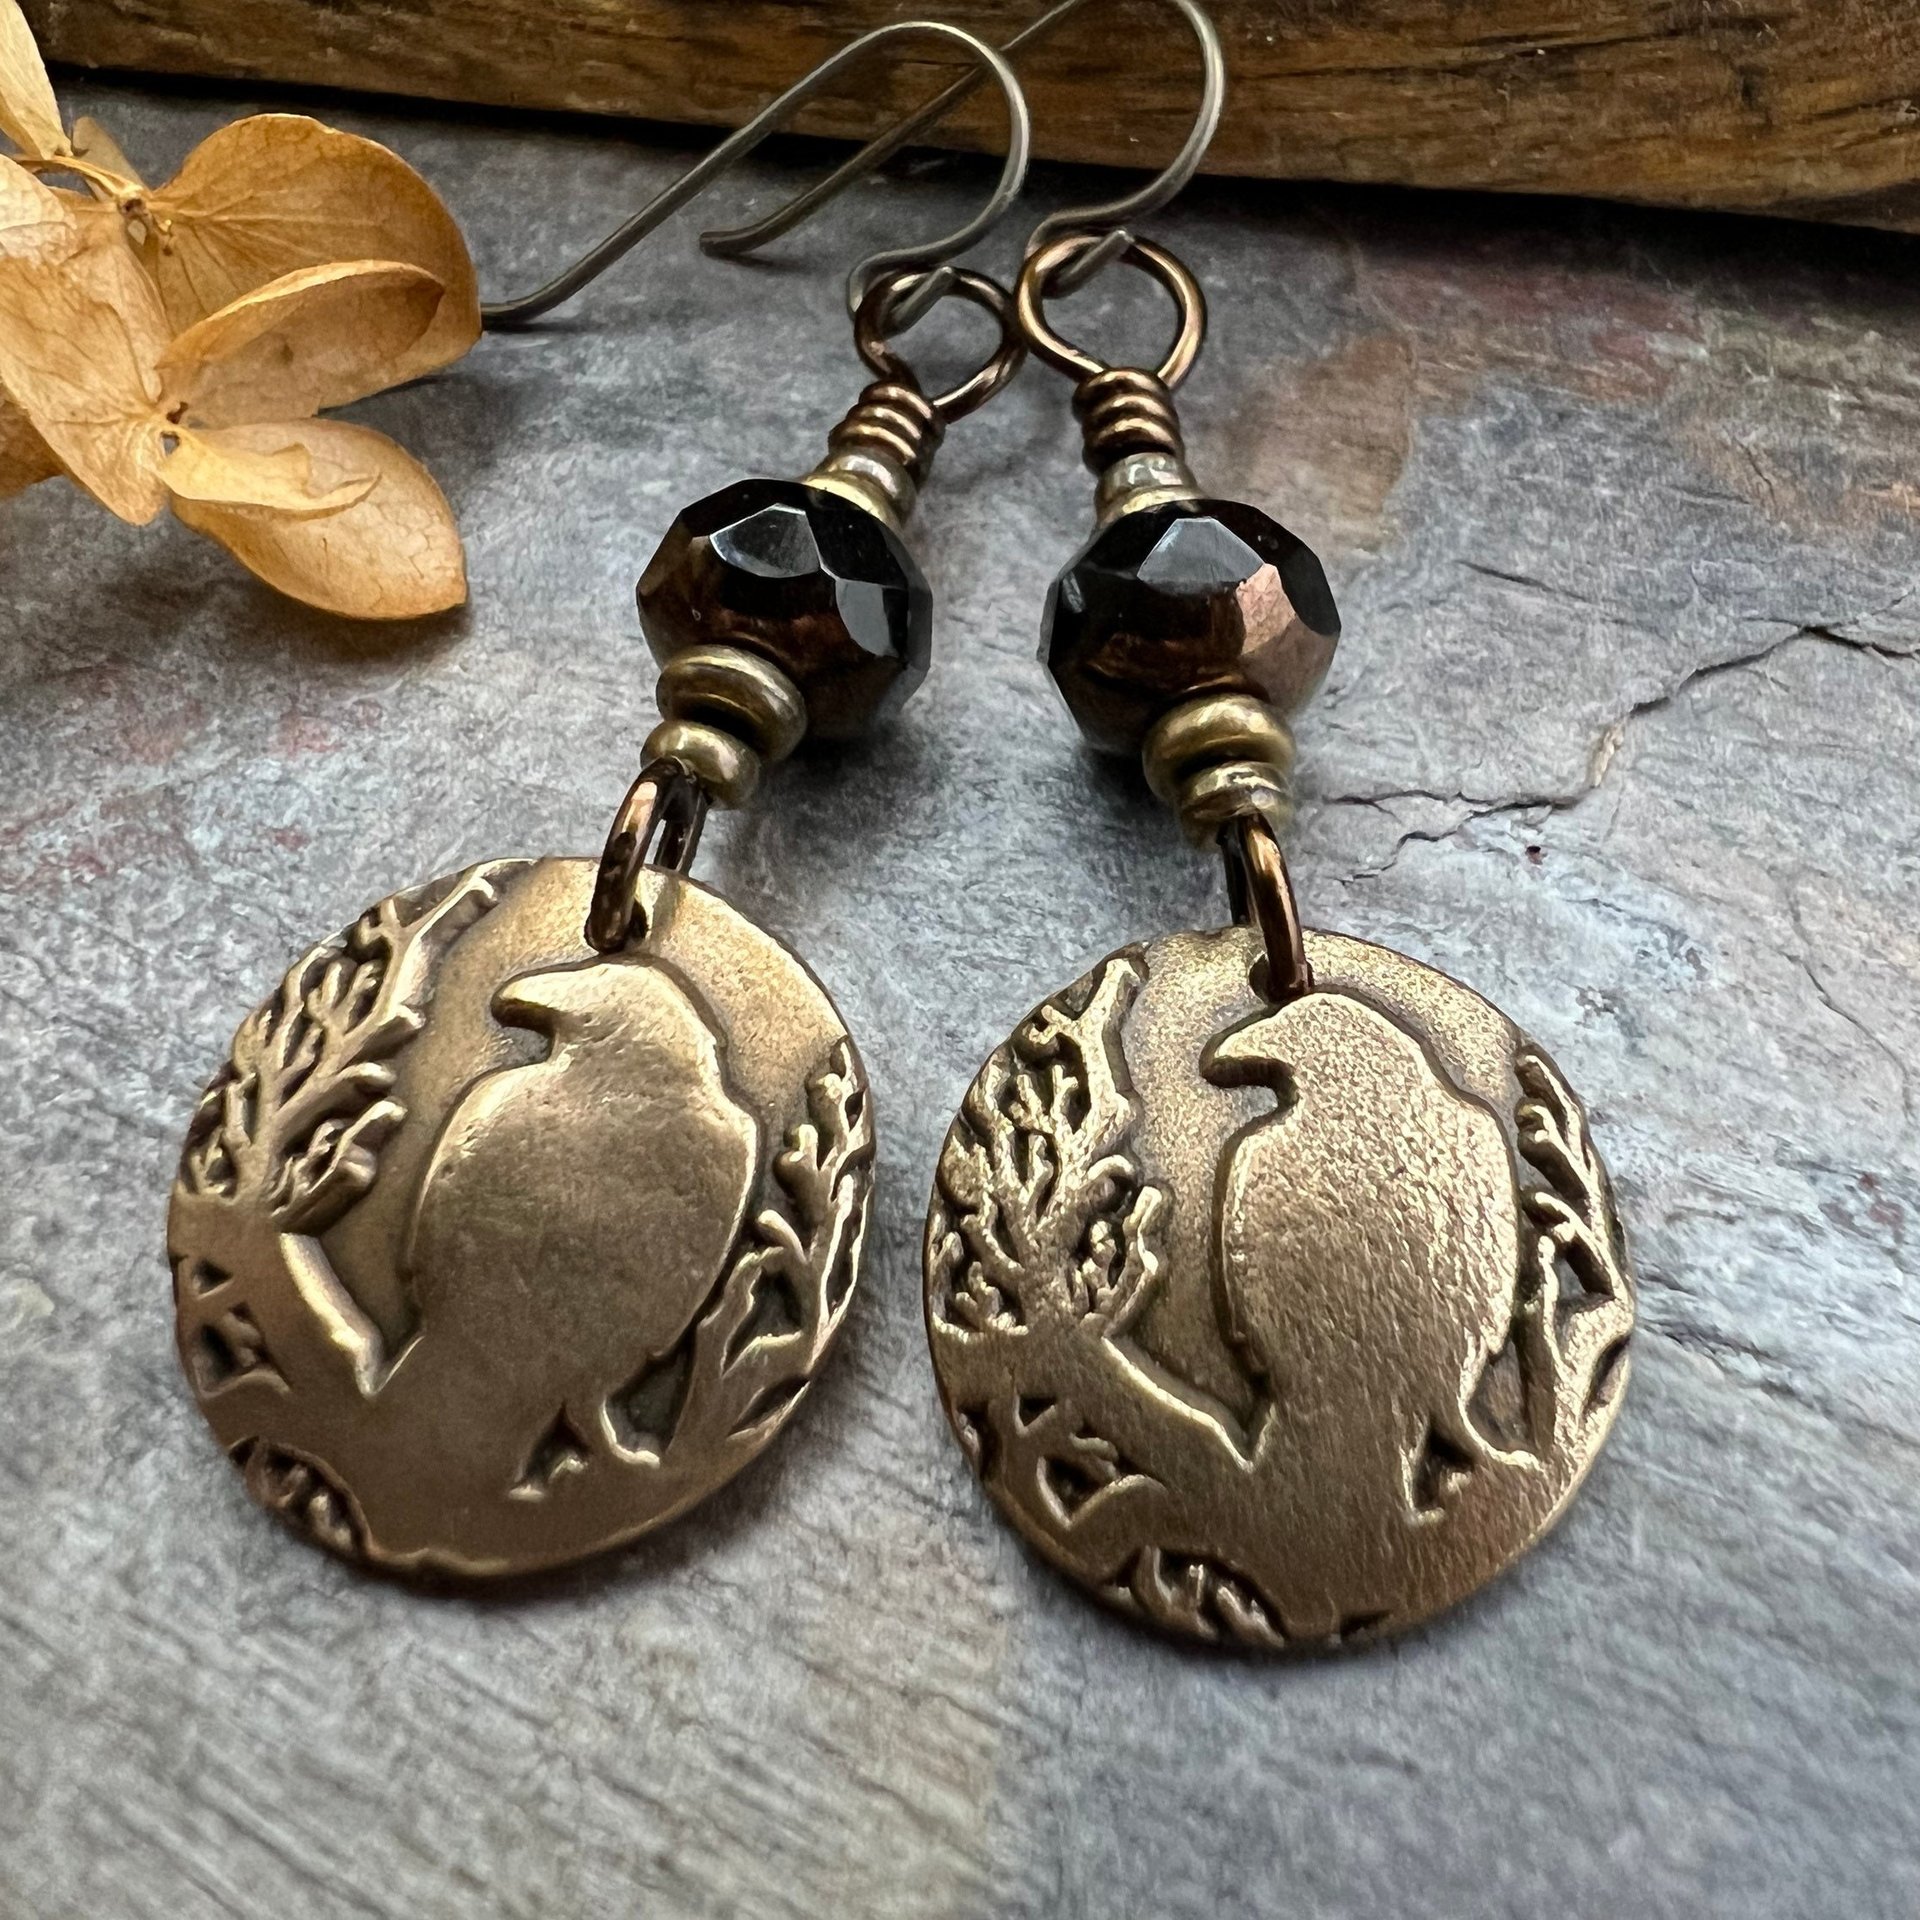 Raven Bronze Earrings, Irish Celtic Jewelry, Odin's Ravens, Pagan Wiccan, Celtic Witch Goddess, Crow Corvid, Hypoallergenic Ear Wires